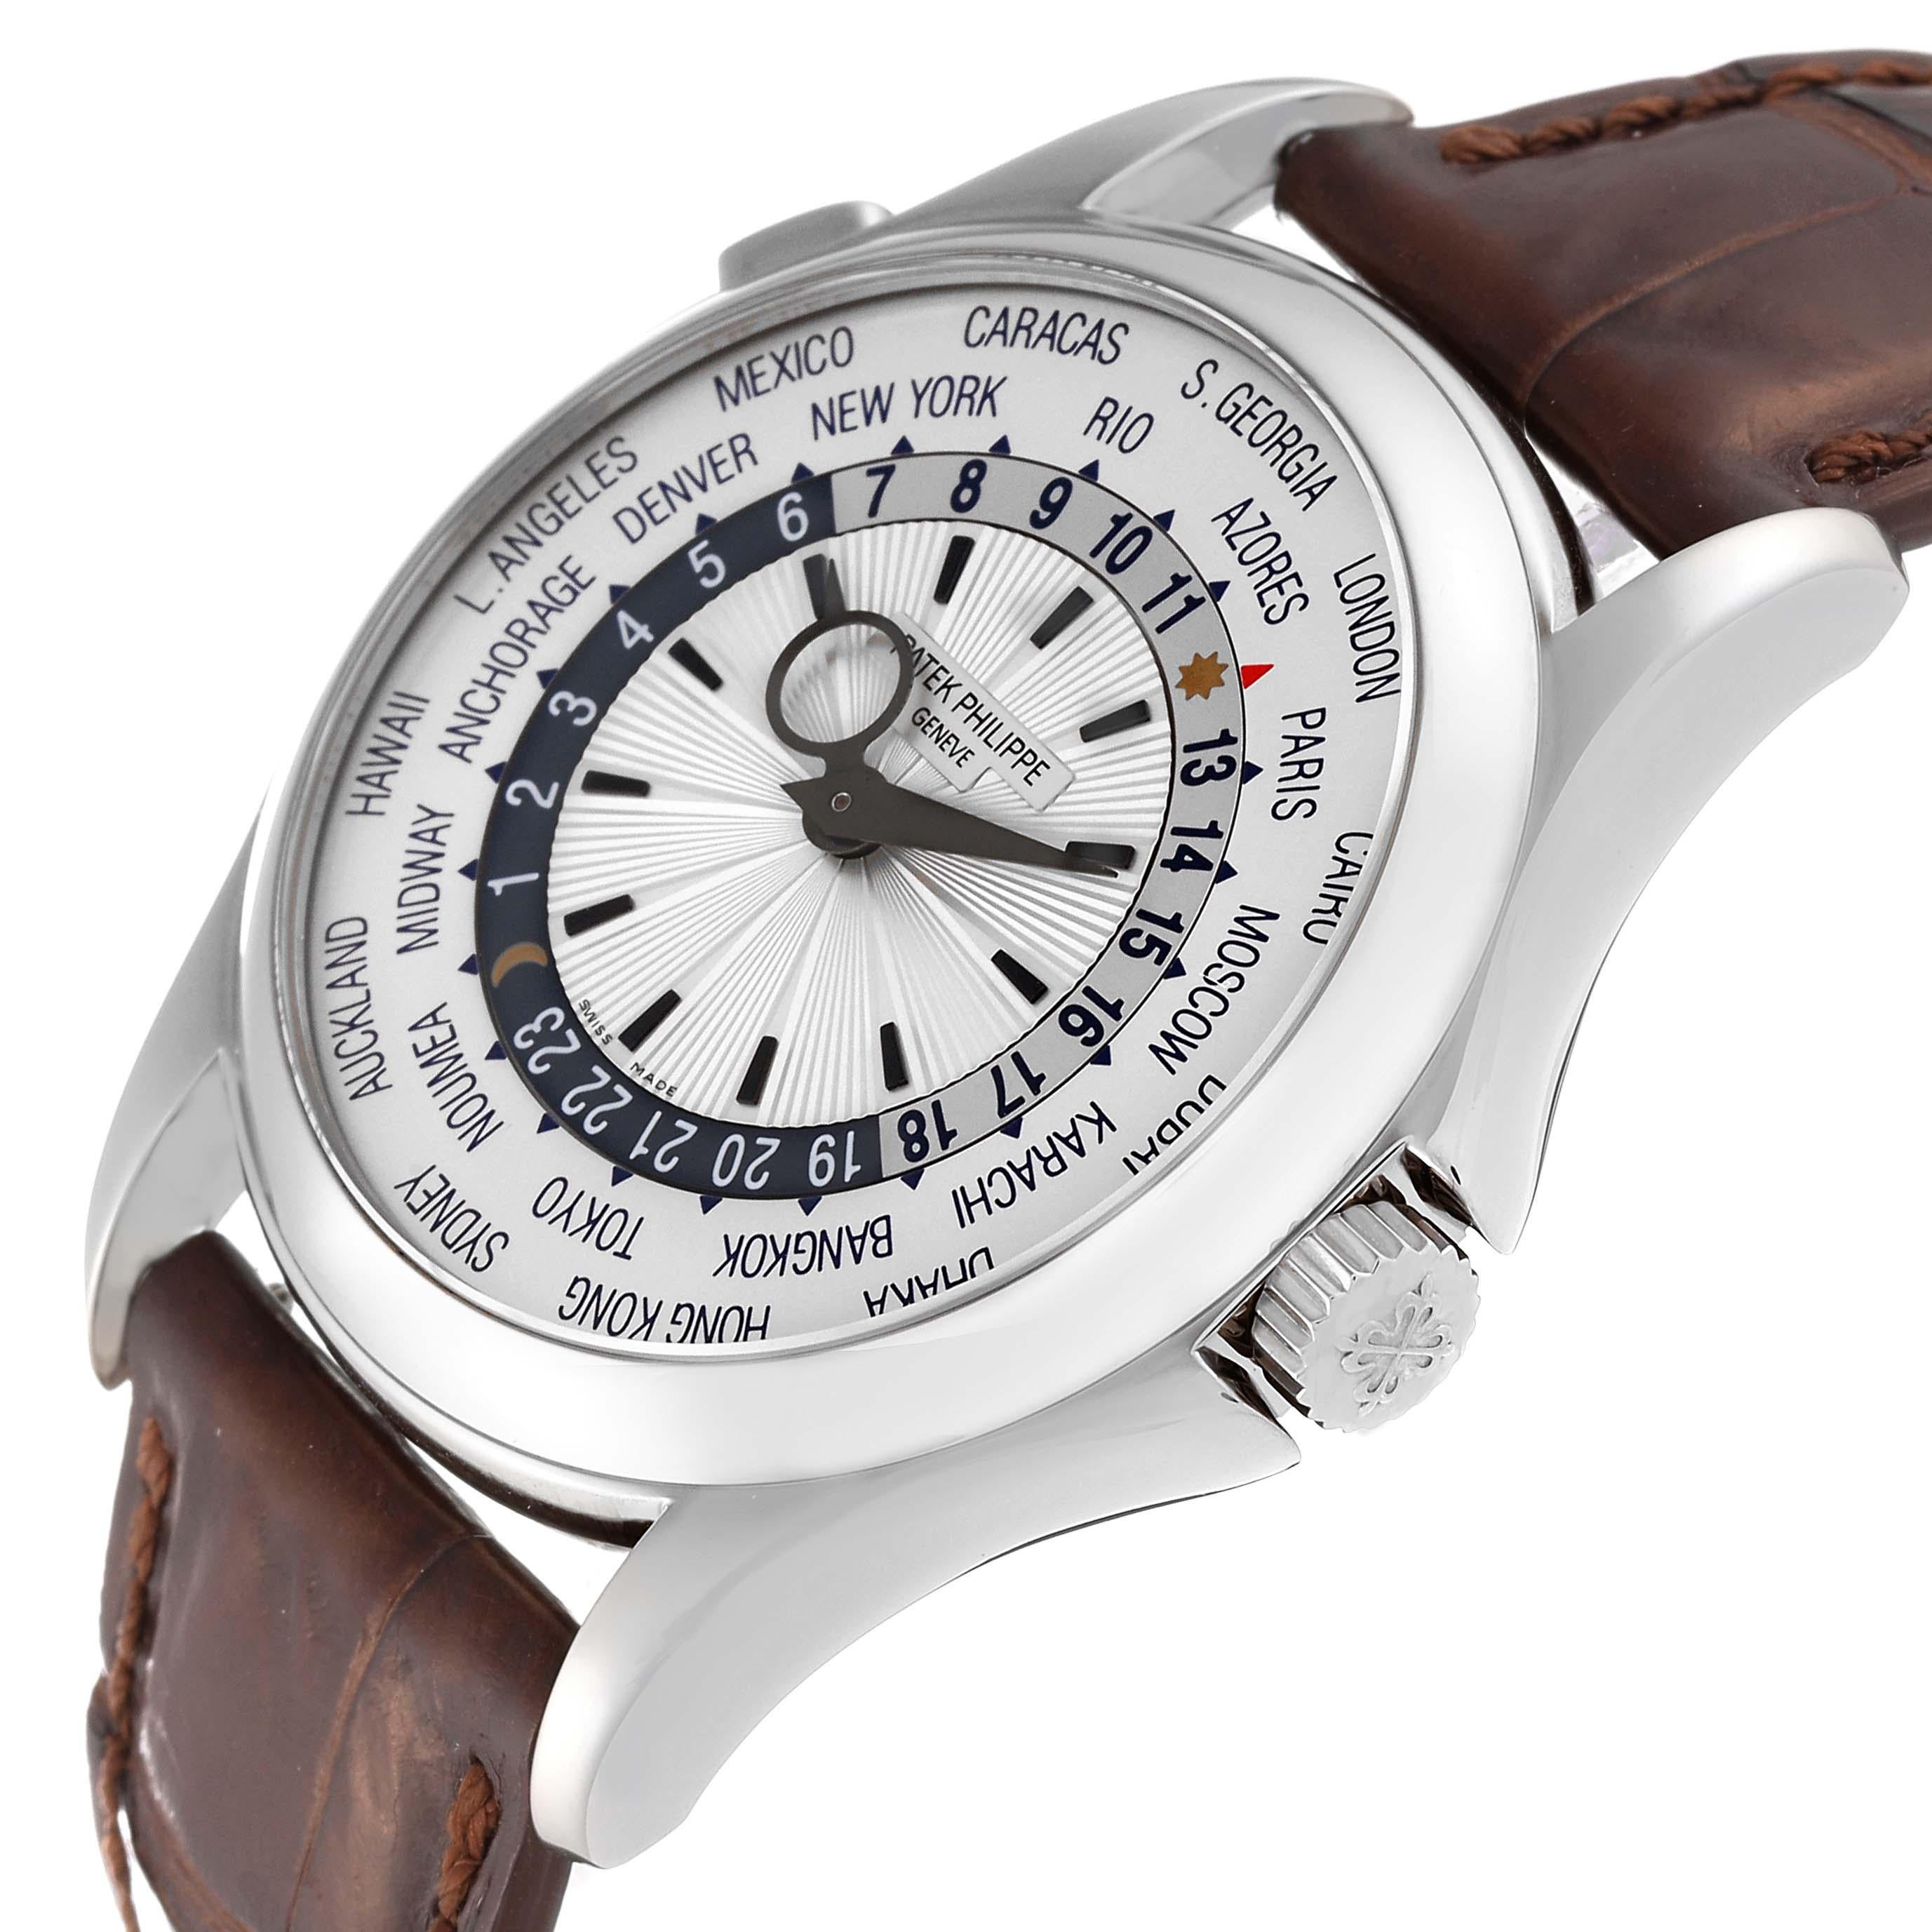 Patek Philippe World Time Complications White Gold Mens Watch 5130 In Excellent Condition For Sale In Atlanta, GA